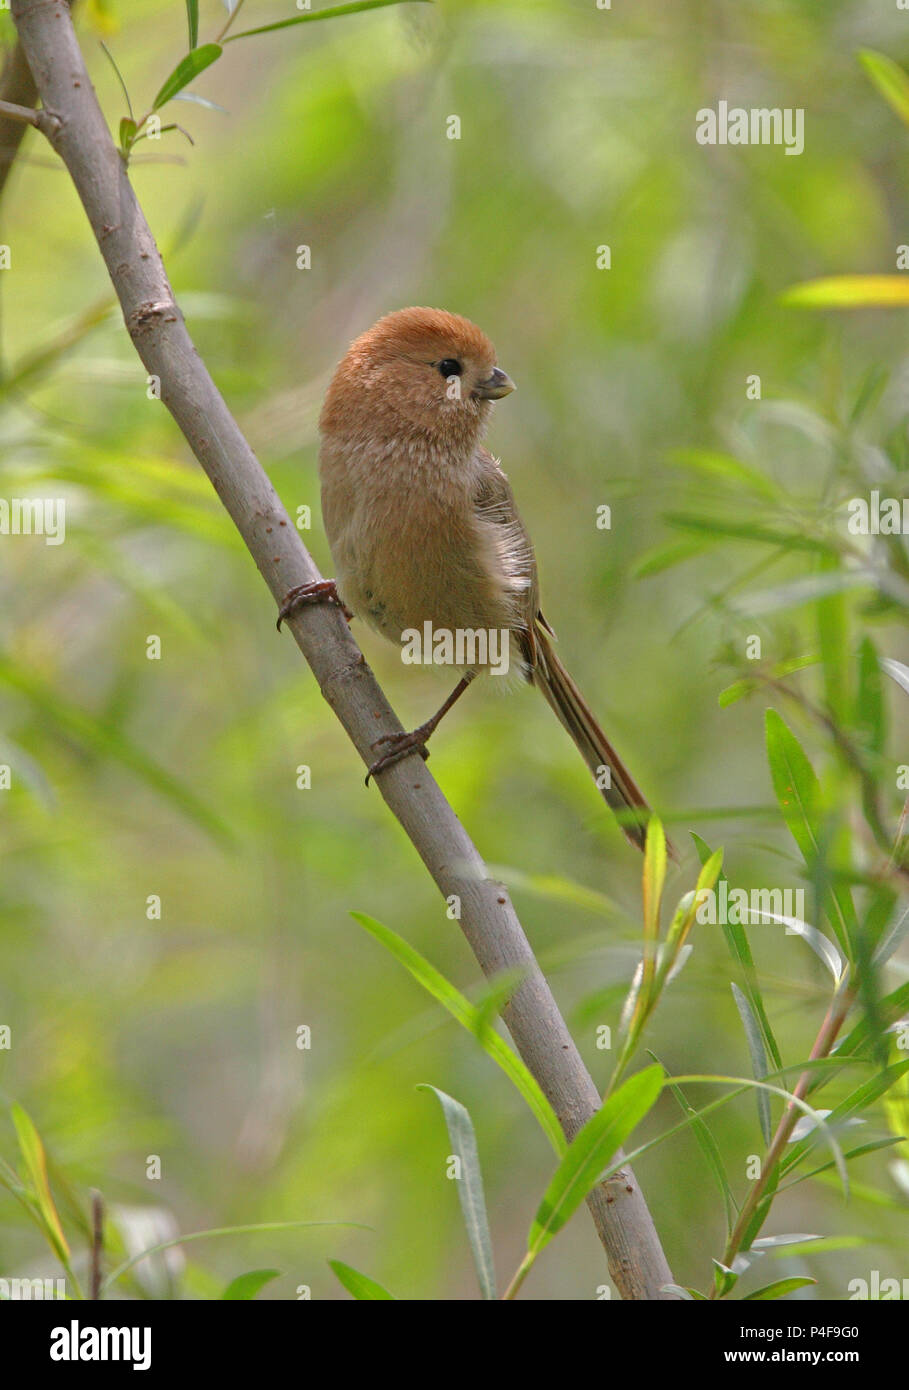 Vinous-throated Parrotbill (Paradoxornis webbianus mantschuricus) adult perched on branch  Beidaihe, Hebei, China  May 2010 Stock Photo